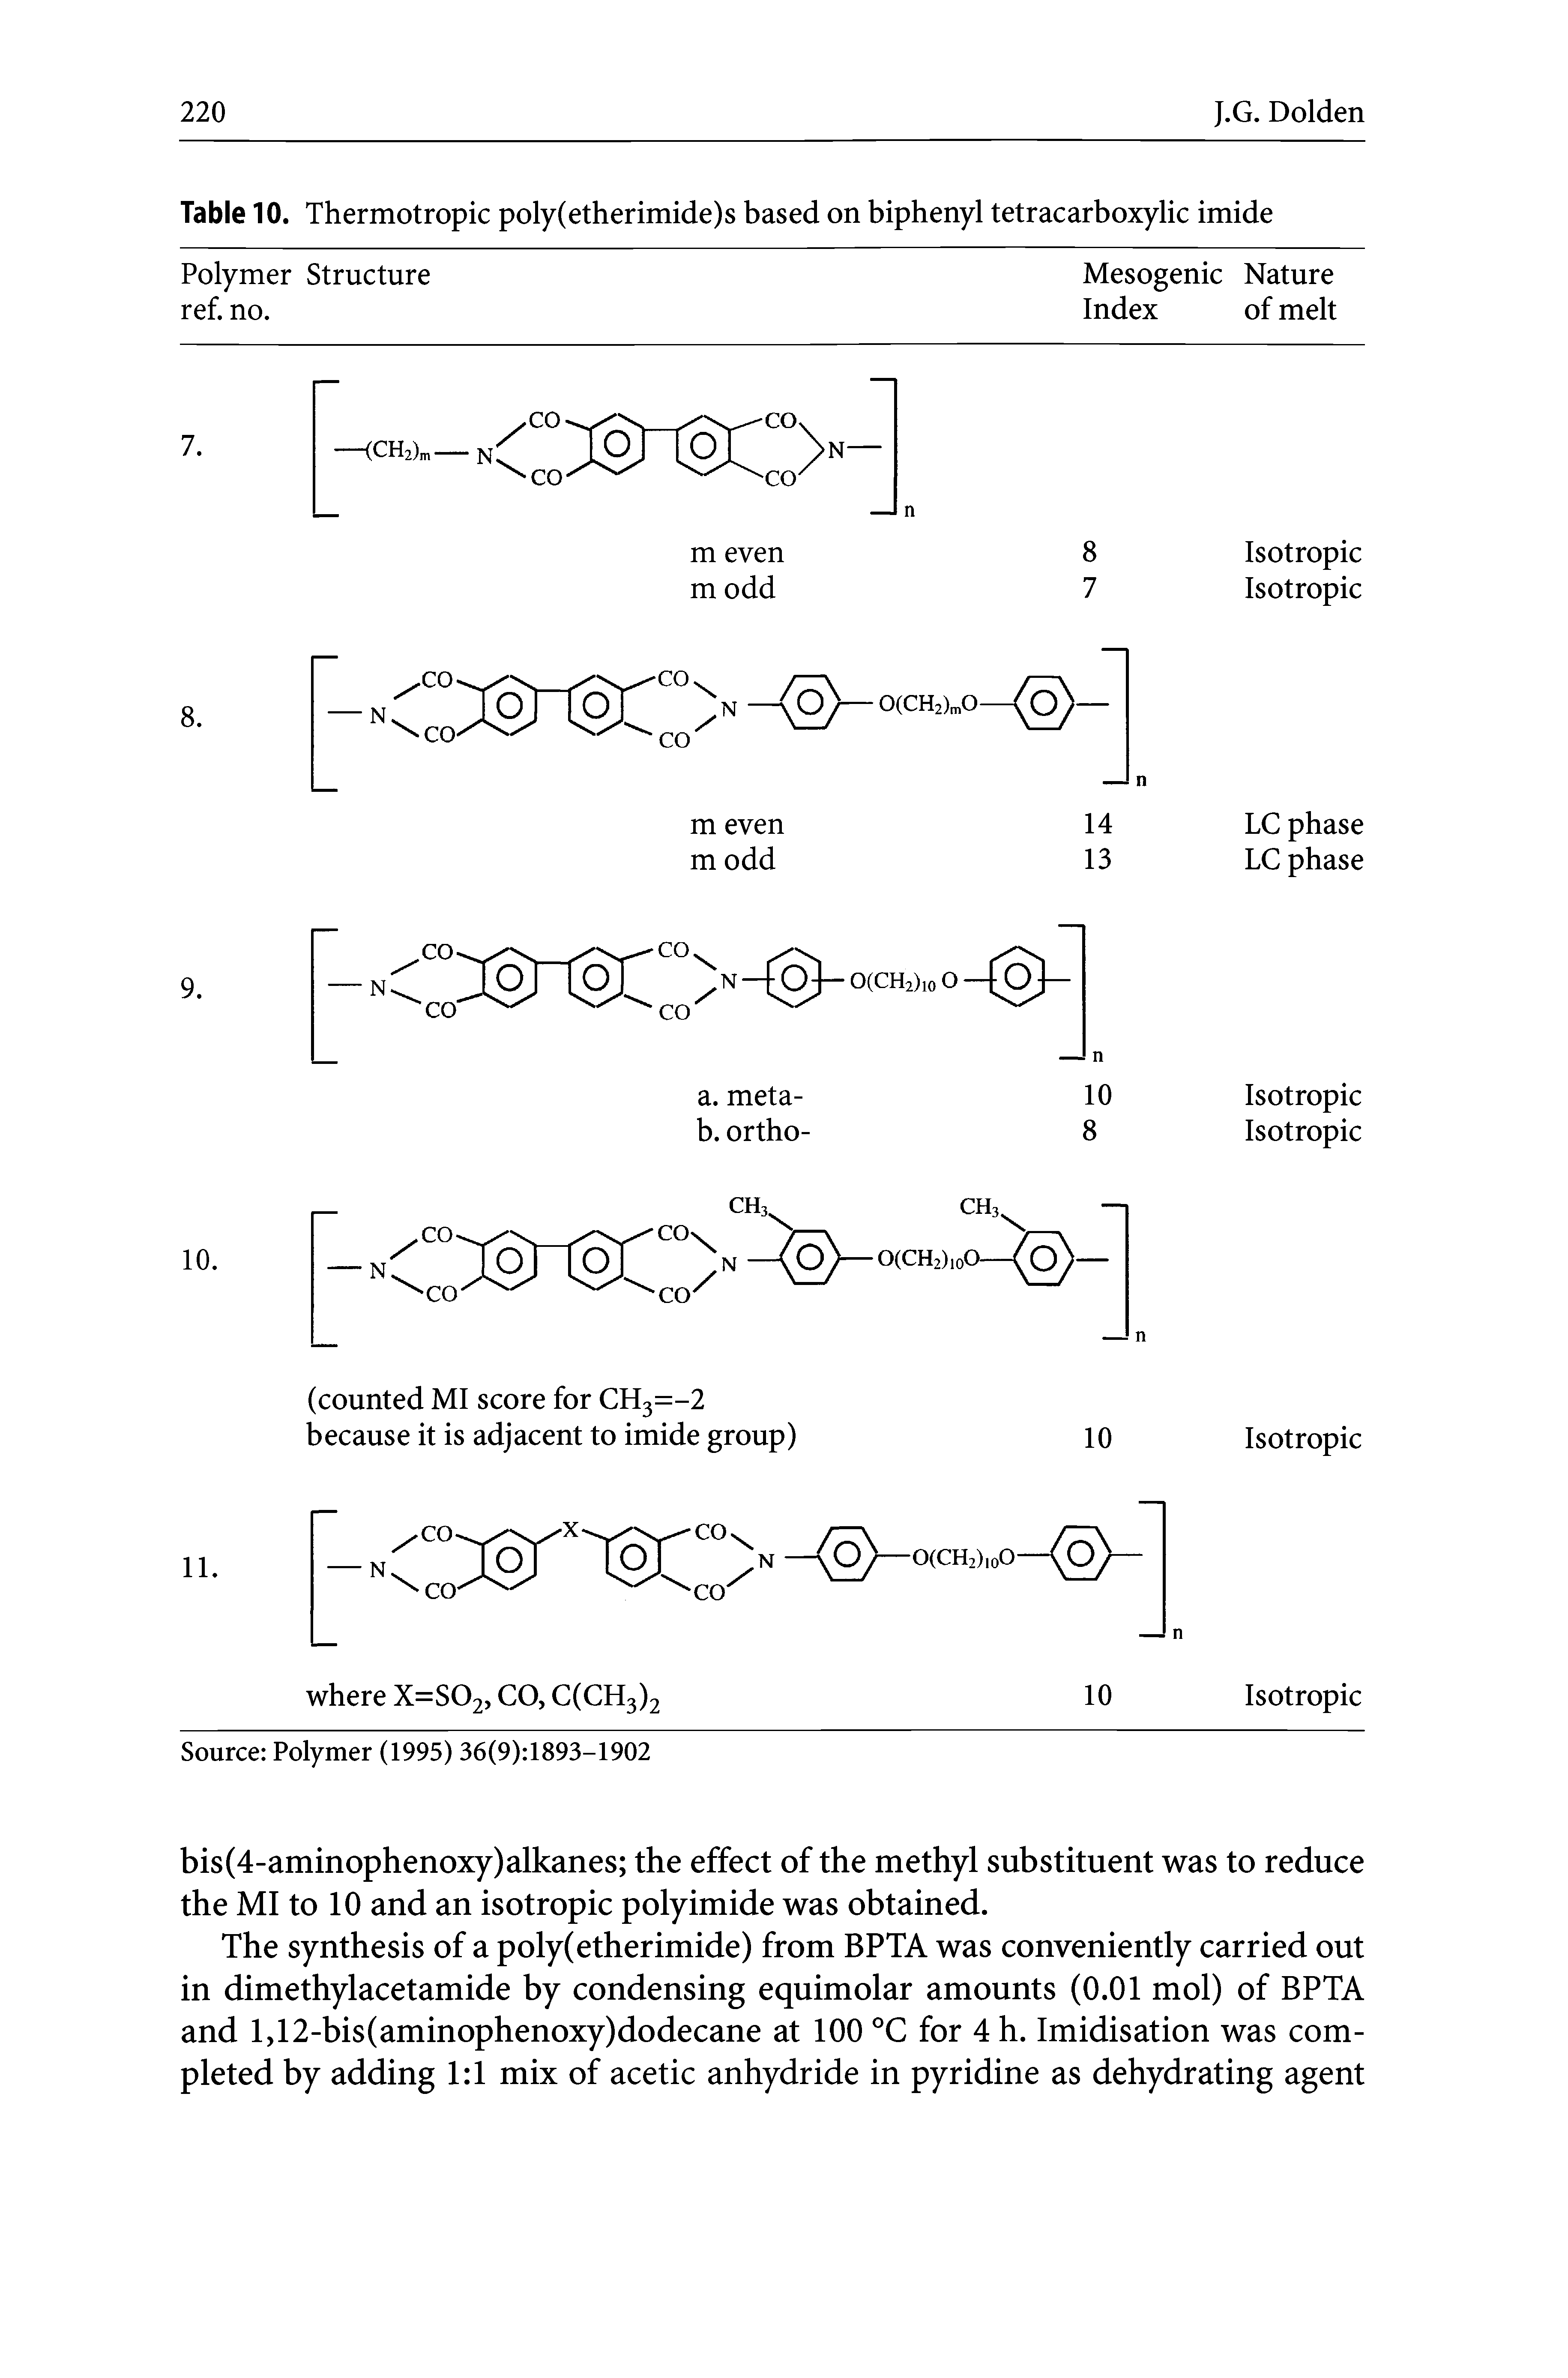 Table 10. Thermotropic poly(etherimide)s based on biphenyl tetracarboxylic imide...